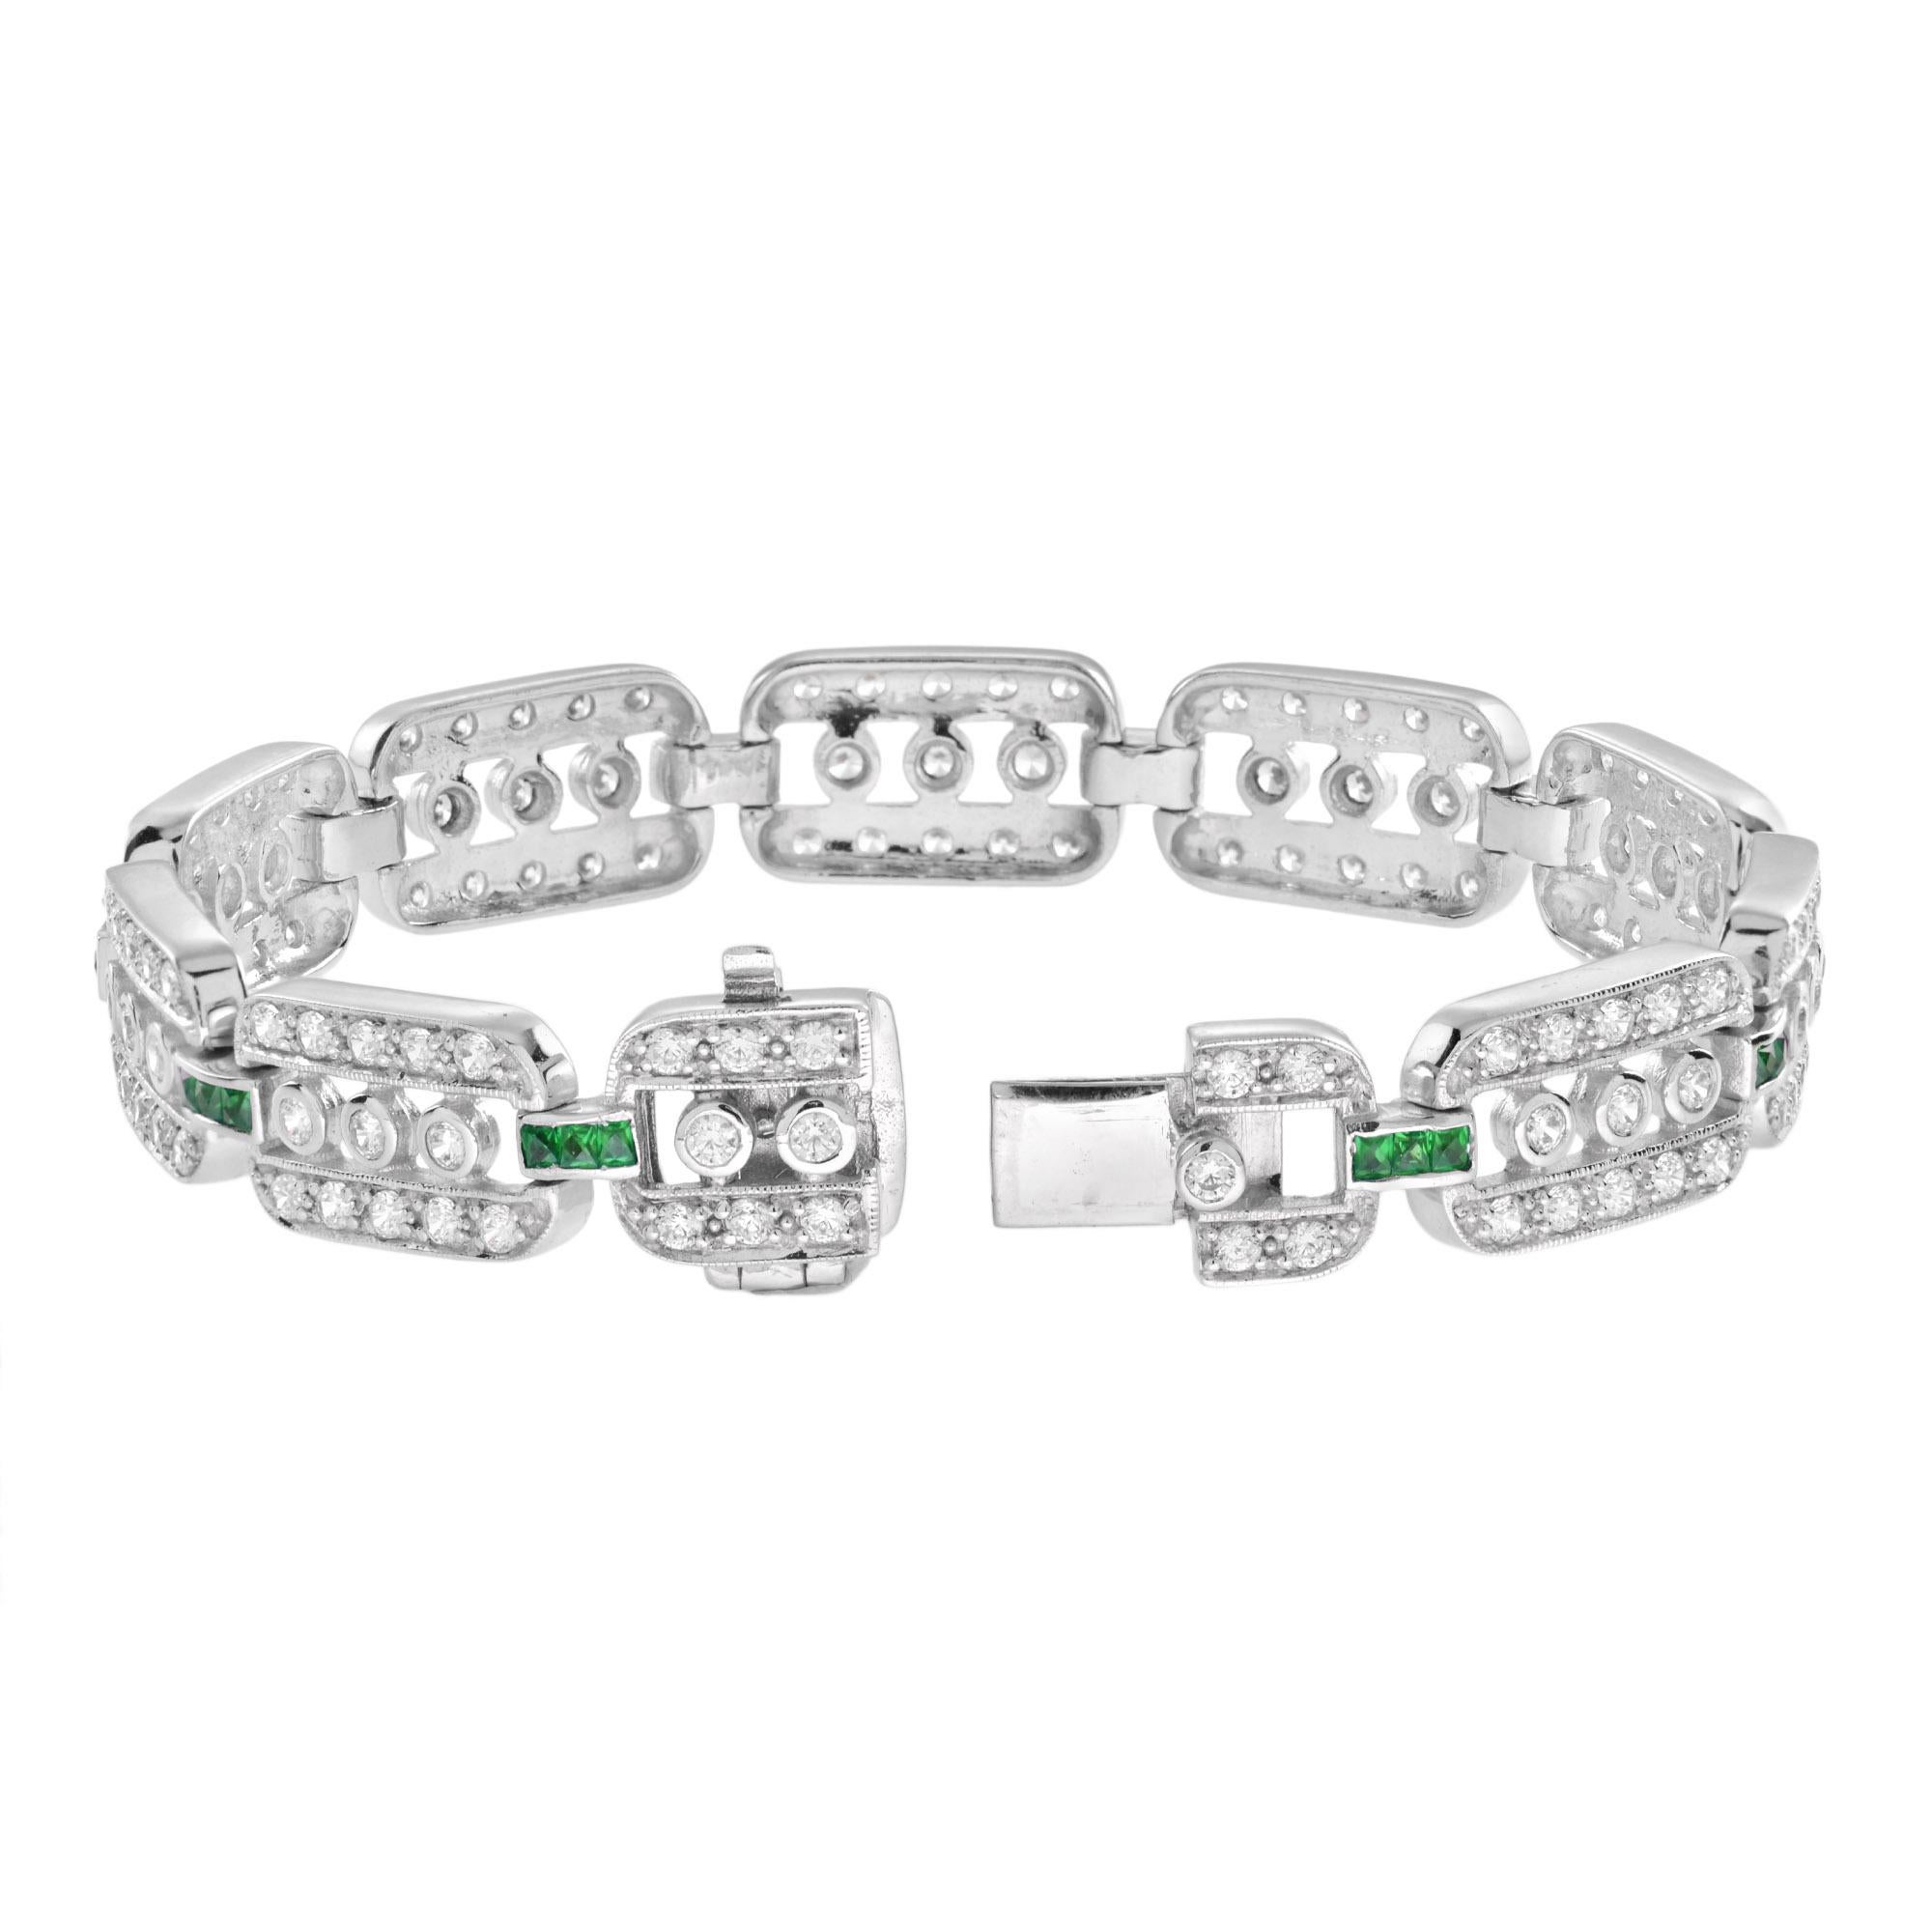 6 Ct. Diamond and Emerald Art Deco Style Link Bracelet in 14K White Gold In New Condition For Sale In Bangkok, TH